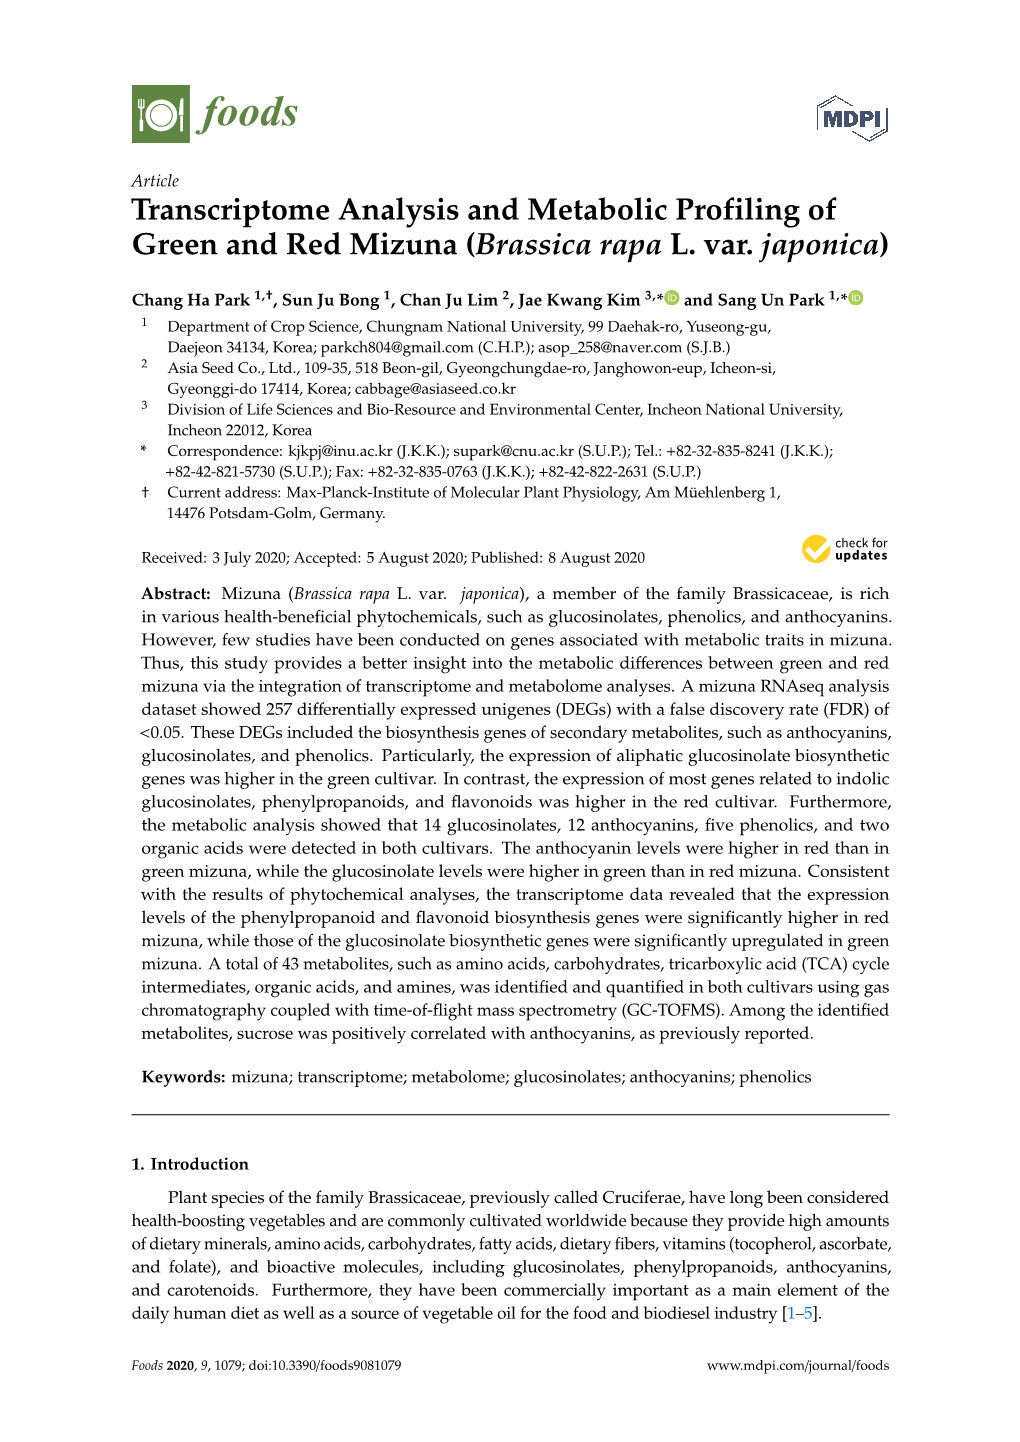 Transcriptome Analysis and Metabolic Profiling of Green and Red Mizuna (Brassica Rapa L